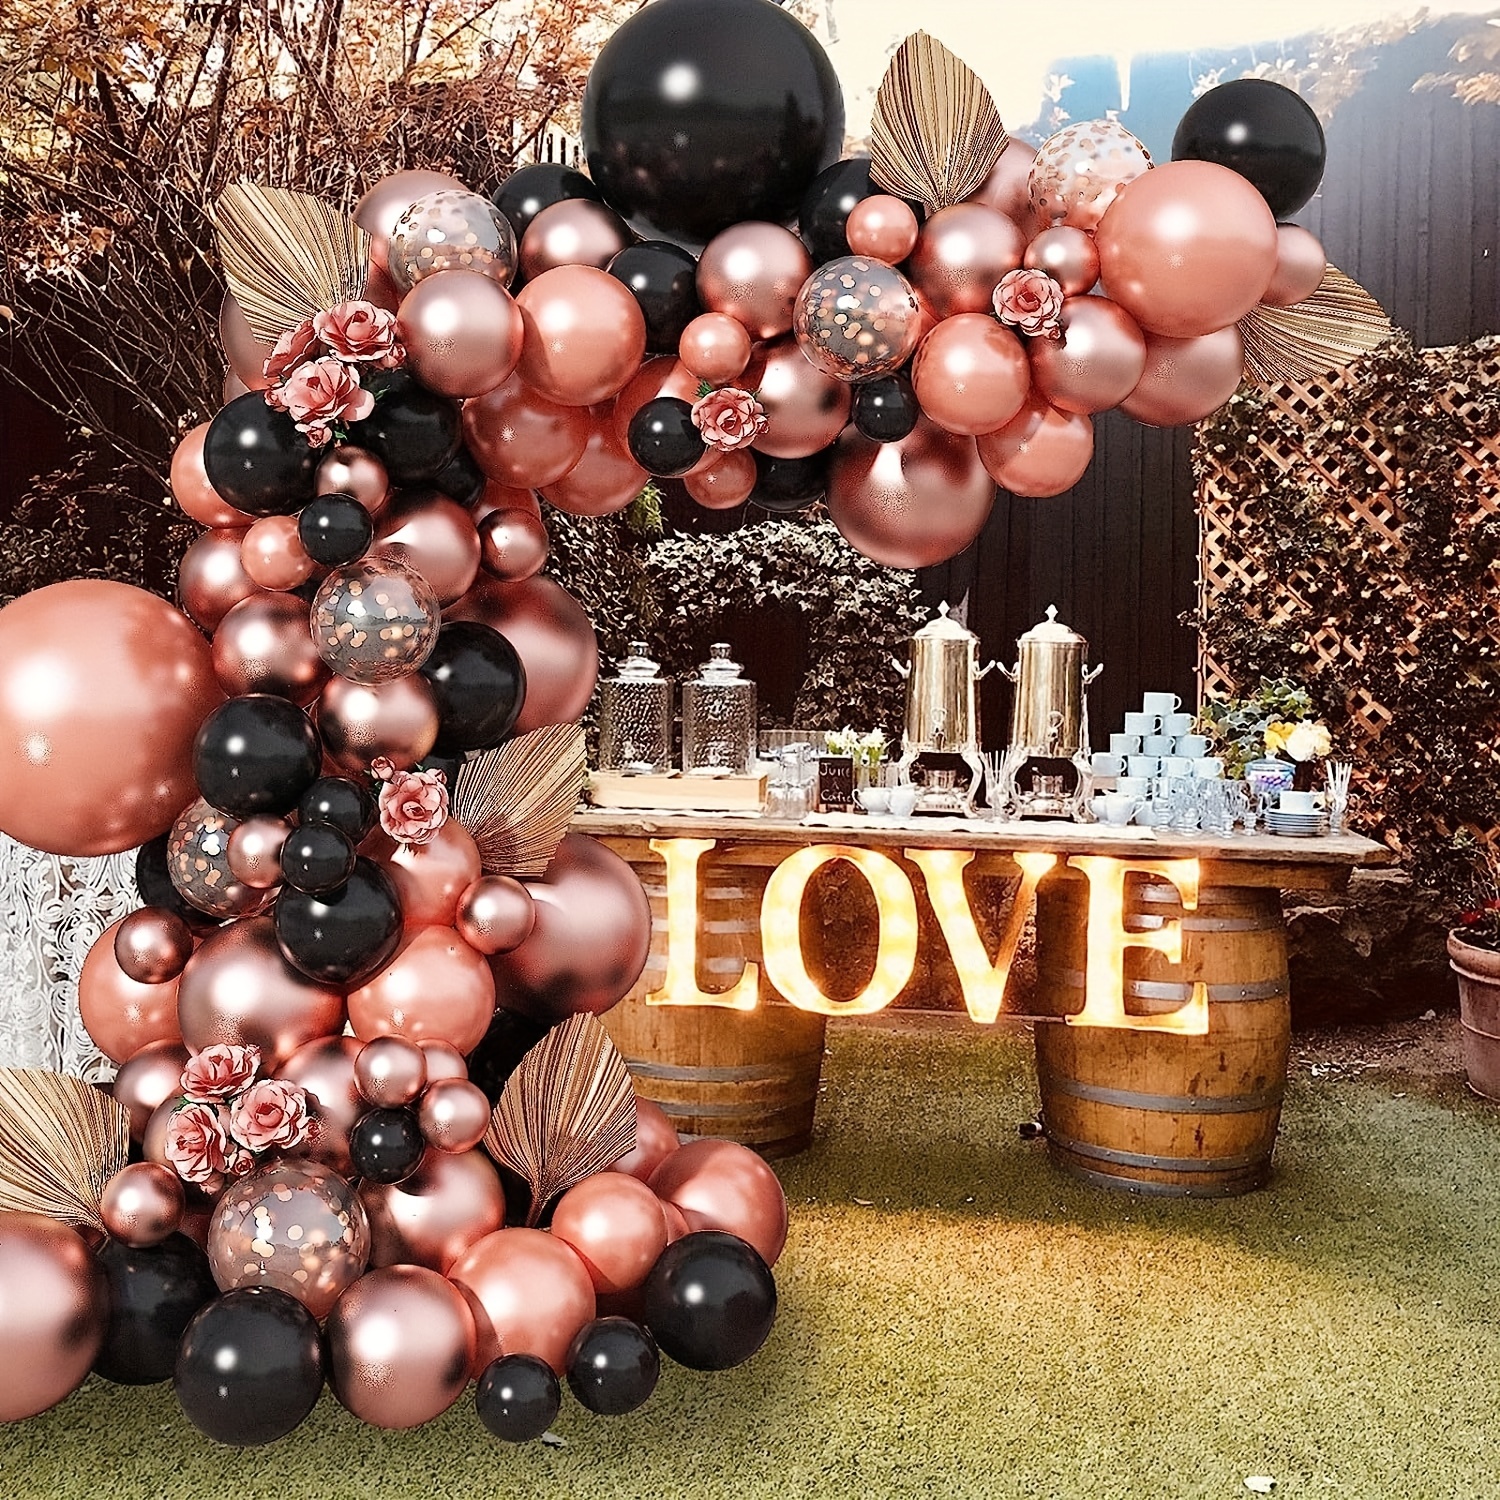 Pink and Black Balloon Garland Birthday Party Decorations Wedding